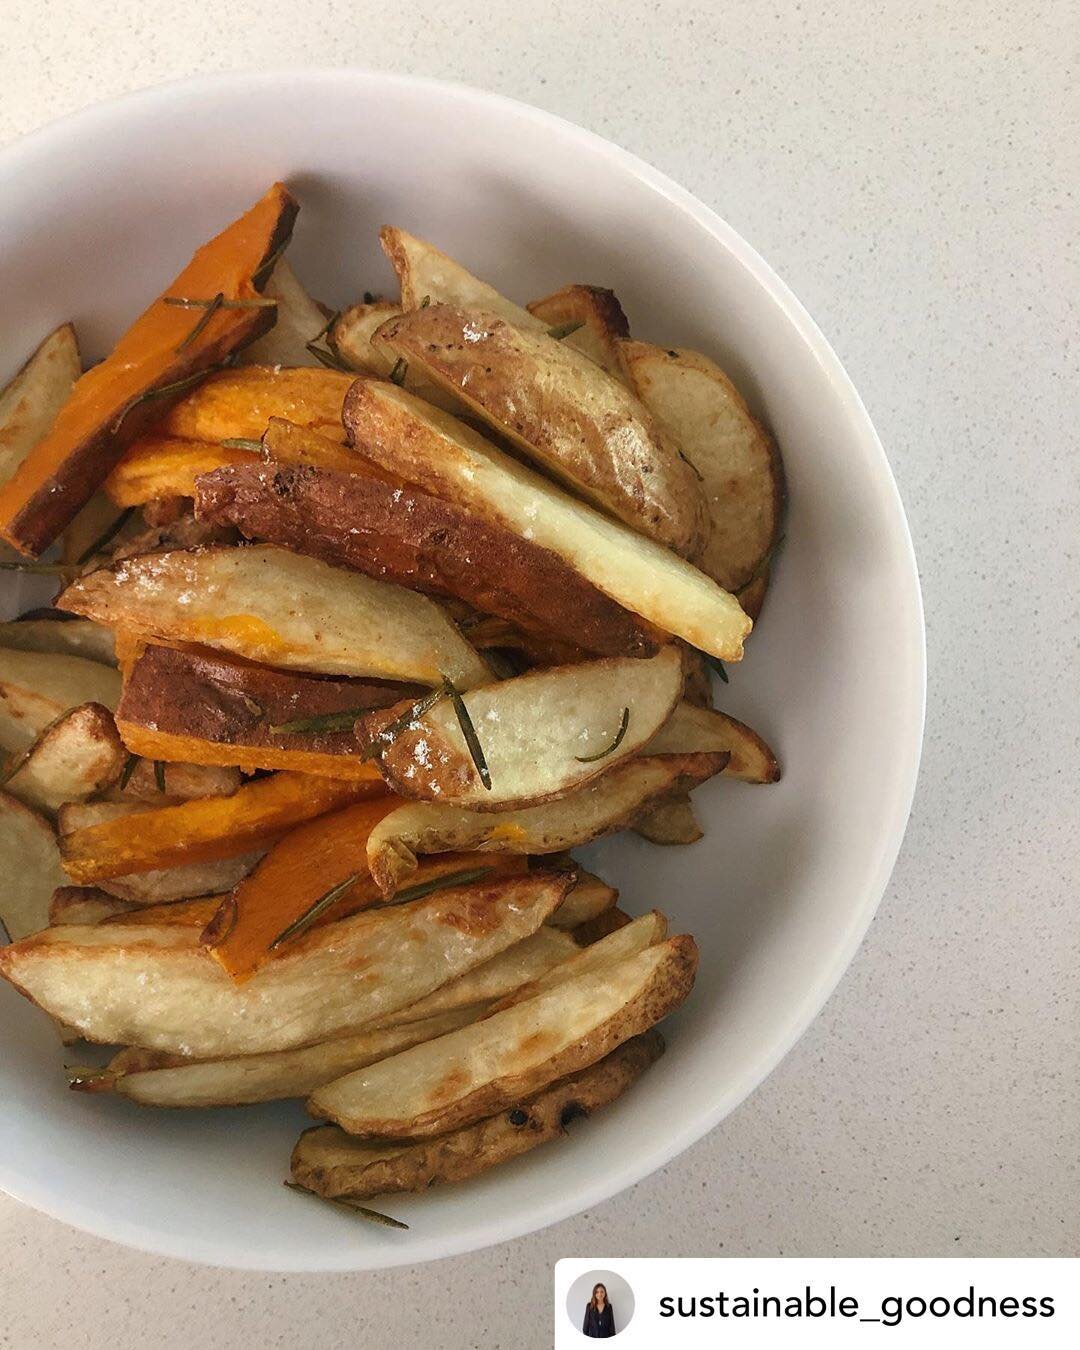 Posted @withrepost &bull; @sustainable_goodness 🍠 Homemade chips 🥔 
Super easy, super delicious, healthy and package free!! 😍 
To make these bad boys: 
Chop up potatoes 
Place in a container with some rosemary (fresh or dried), add a drizzle of ol